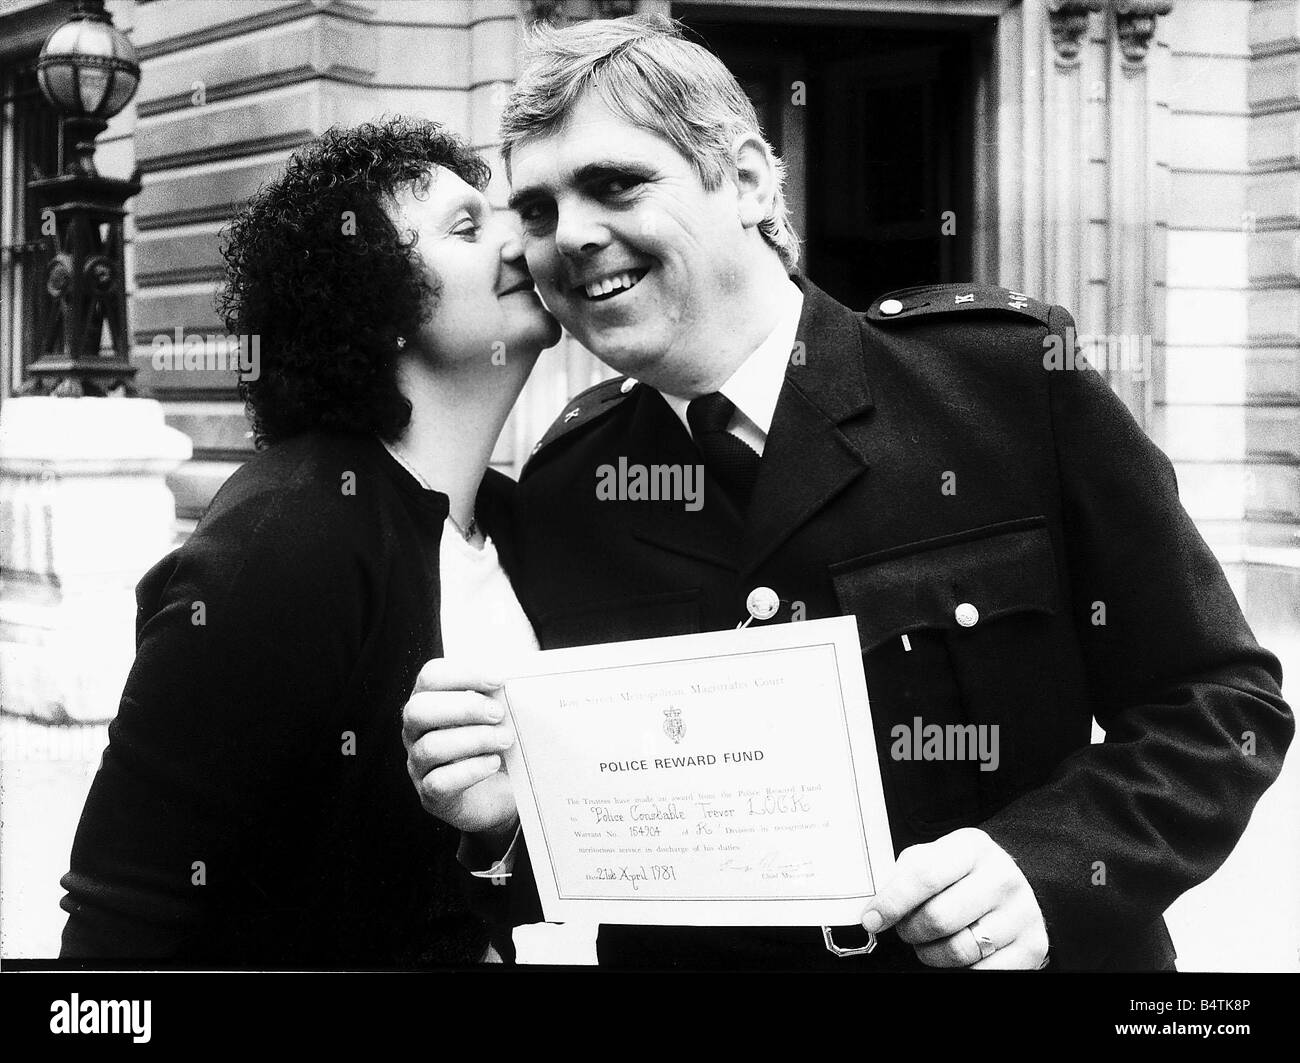 Trevor Lock Police Constable during the Iranian Embassy Siege recieves another award for his bravery from Bow Street Magistrates Court April 1981 Stock Photo